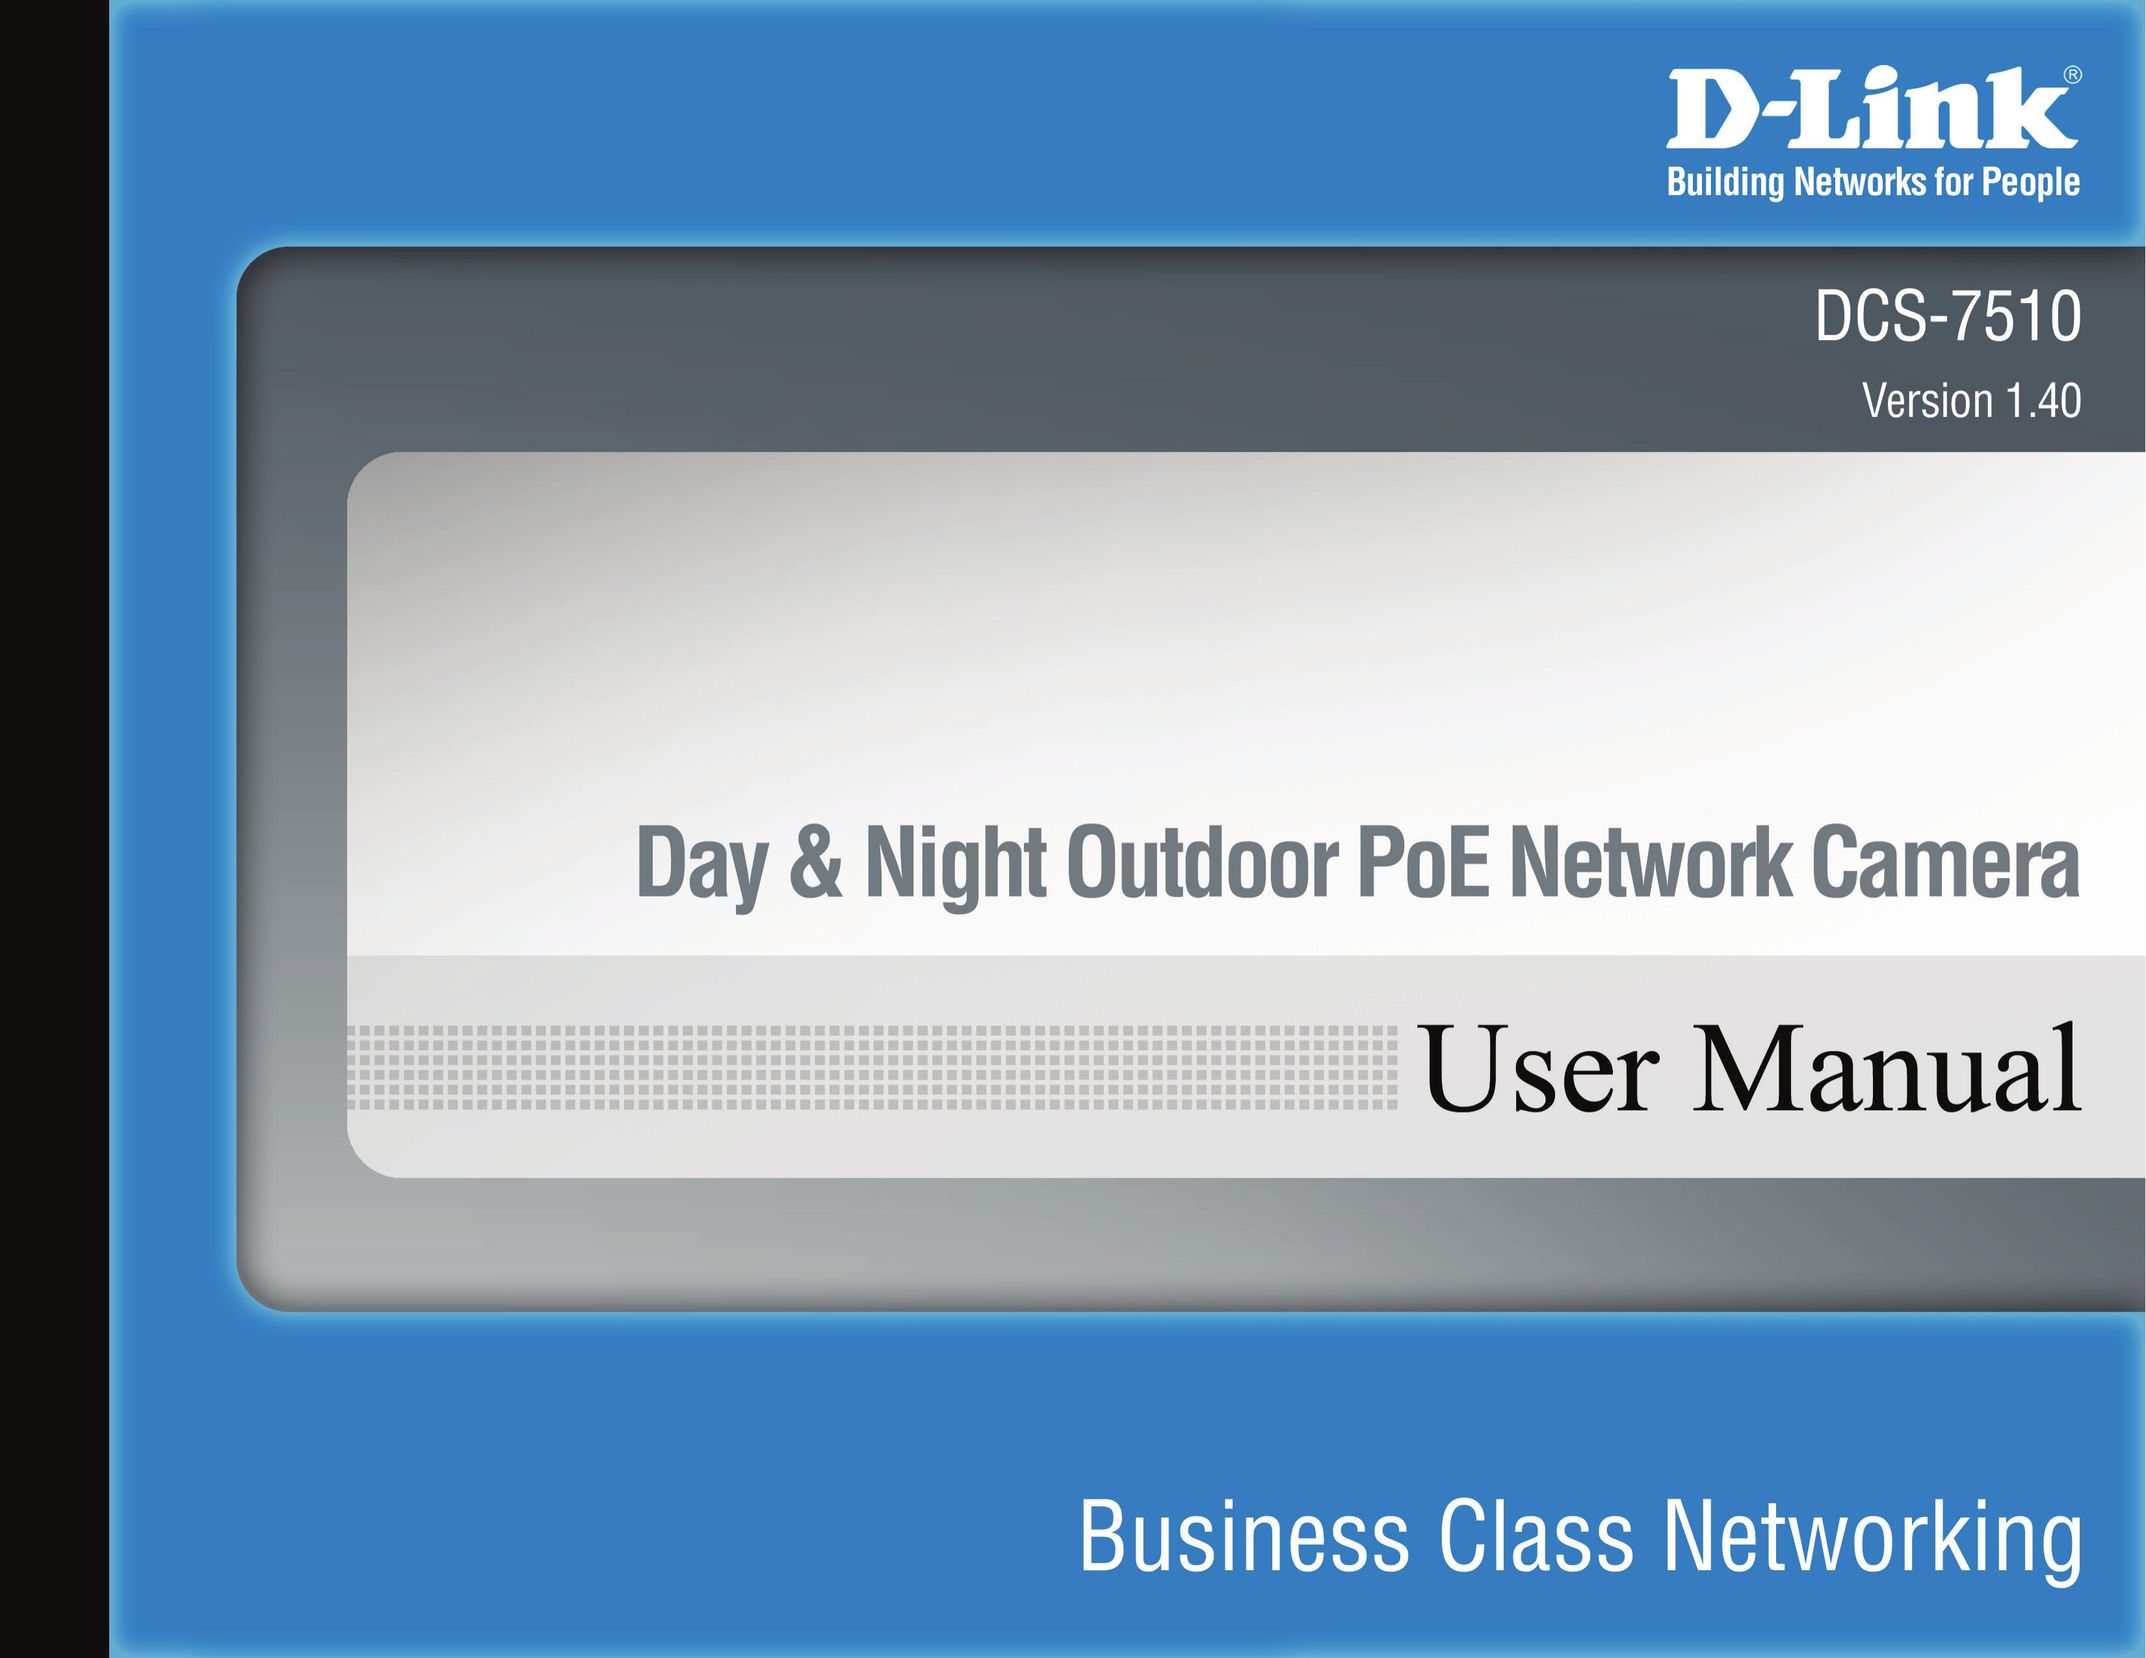 D-Link DCS-7510 Network Router User Manual